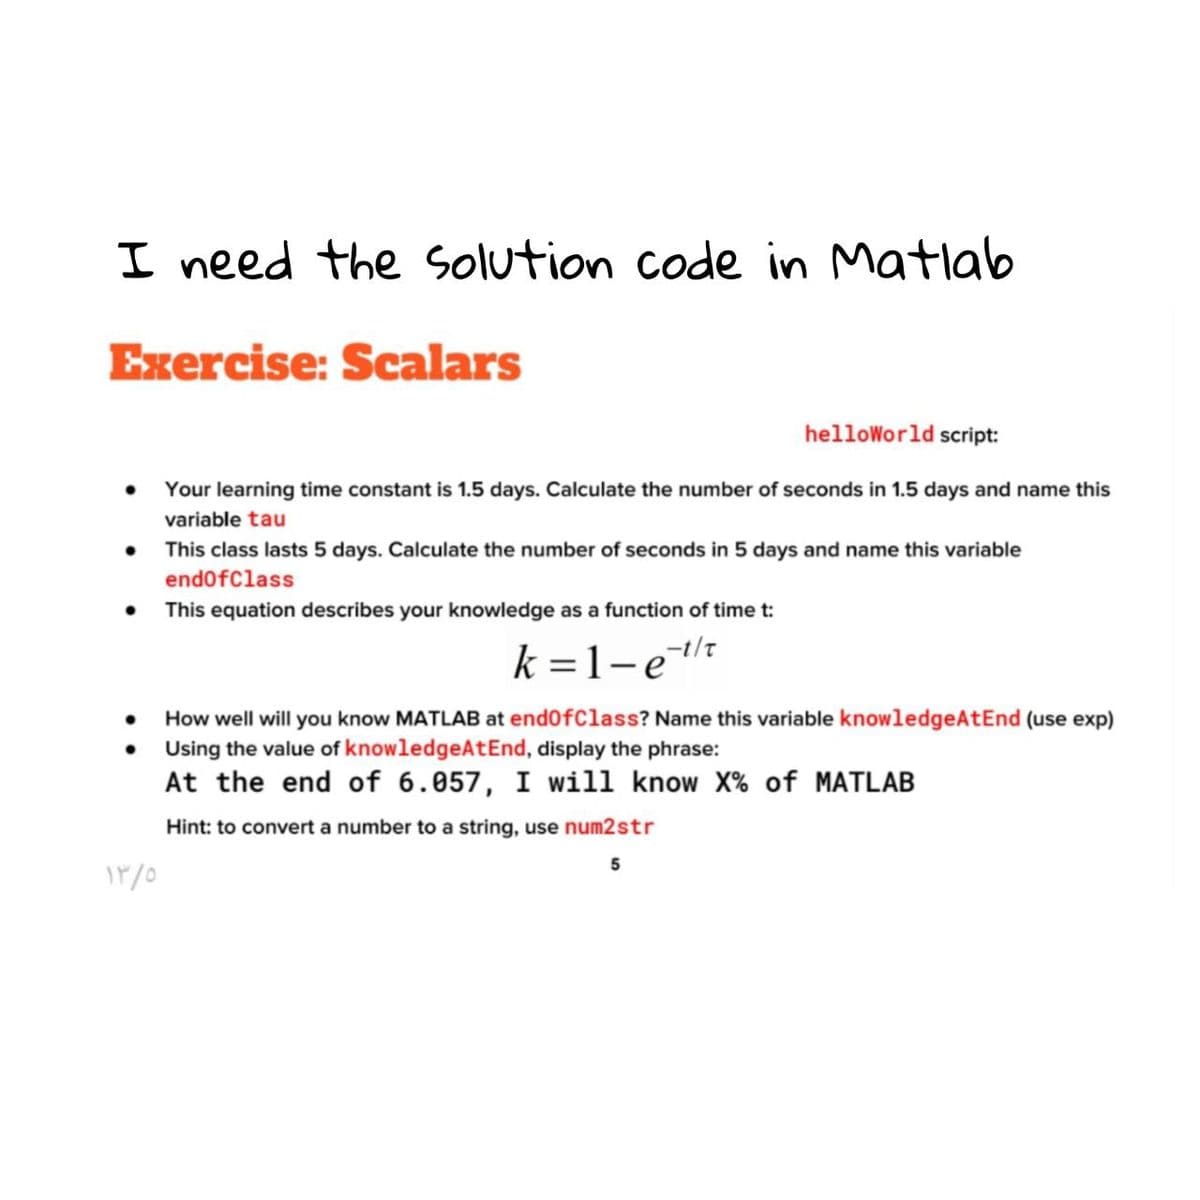 I need the solution code in Matlab
Exercise: Scalars
helloWorld script:
Your learning time constant is 1.5 days. Calculate the number of seconds in 1.5 days and name this
variable tau
• This class lasts 5 days. Calculate the number of seconds in 5 days and name this variable
endofClass
• This equation describes your knowledge as a function of time t:
k =1-e
How well will you know MATLAB at end0fClass? Name this variable knowledgeAtEnd (use exp)
Using the value of knowledgeAtEnd, display the phrase:
At the end of 6.057, I will know X% of MATLAB
Hint: to convert a number to a string, use num2str
